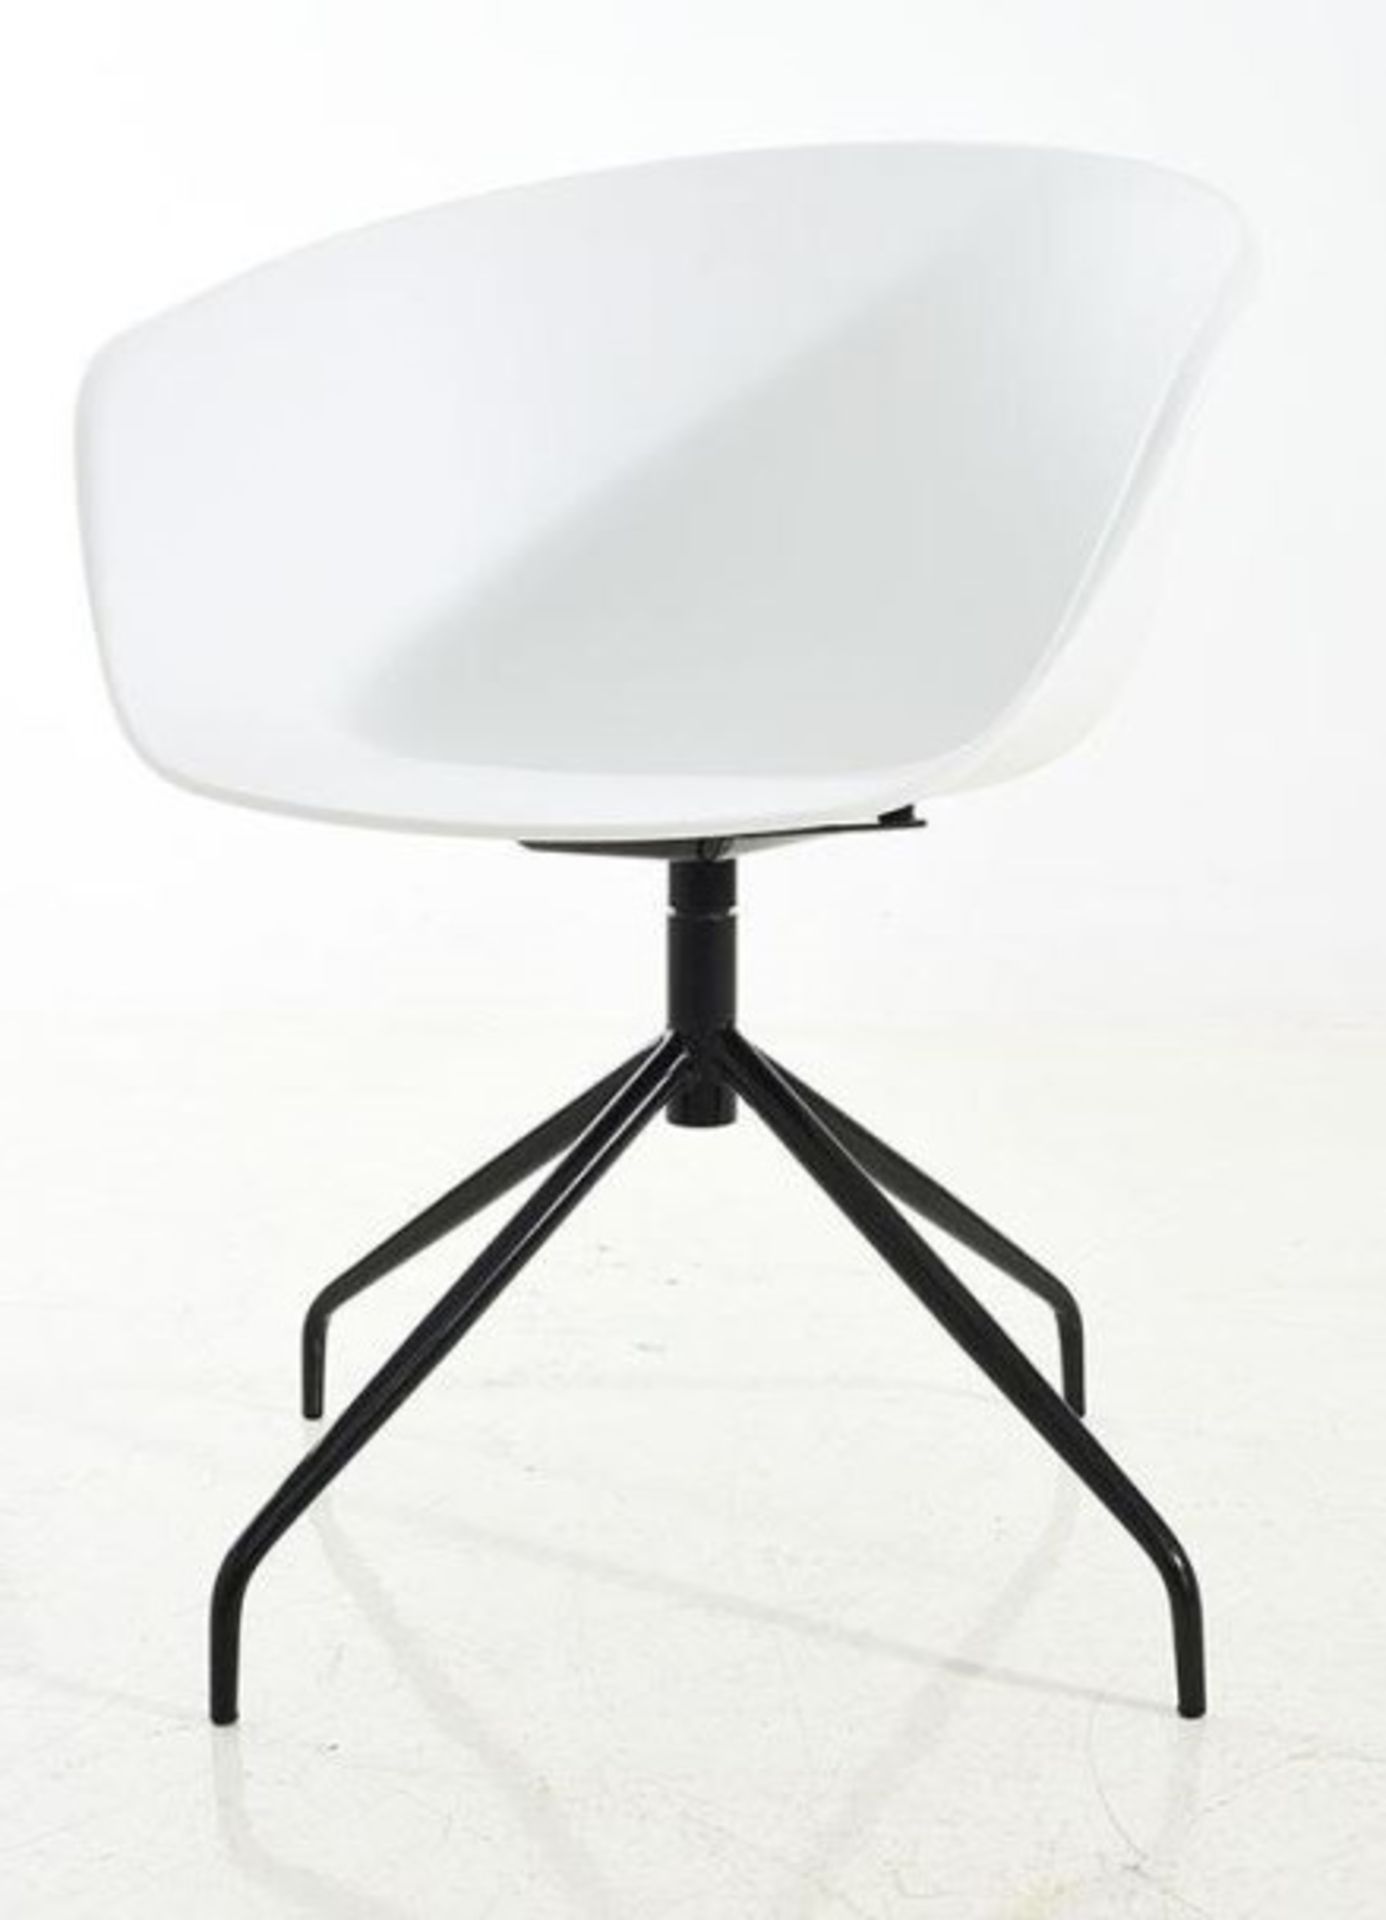 A Set Of 4 x 'NOVA' Elegant Dining Chairs With White Curved Seats And Black Metal Bases - WH3 -